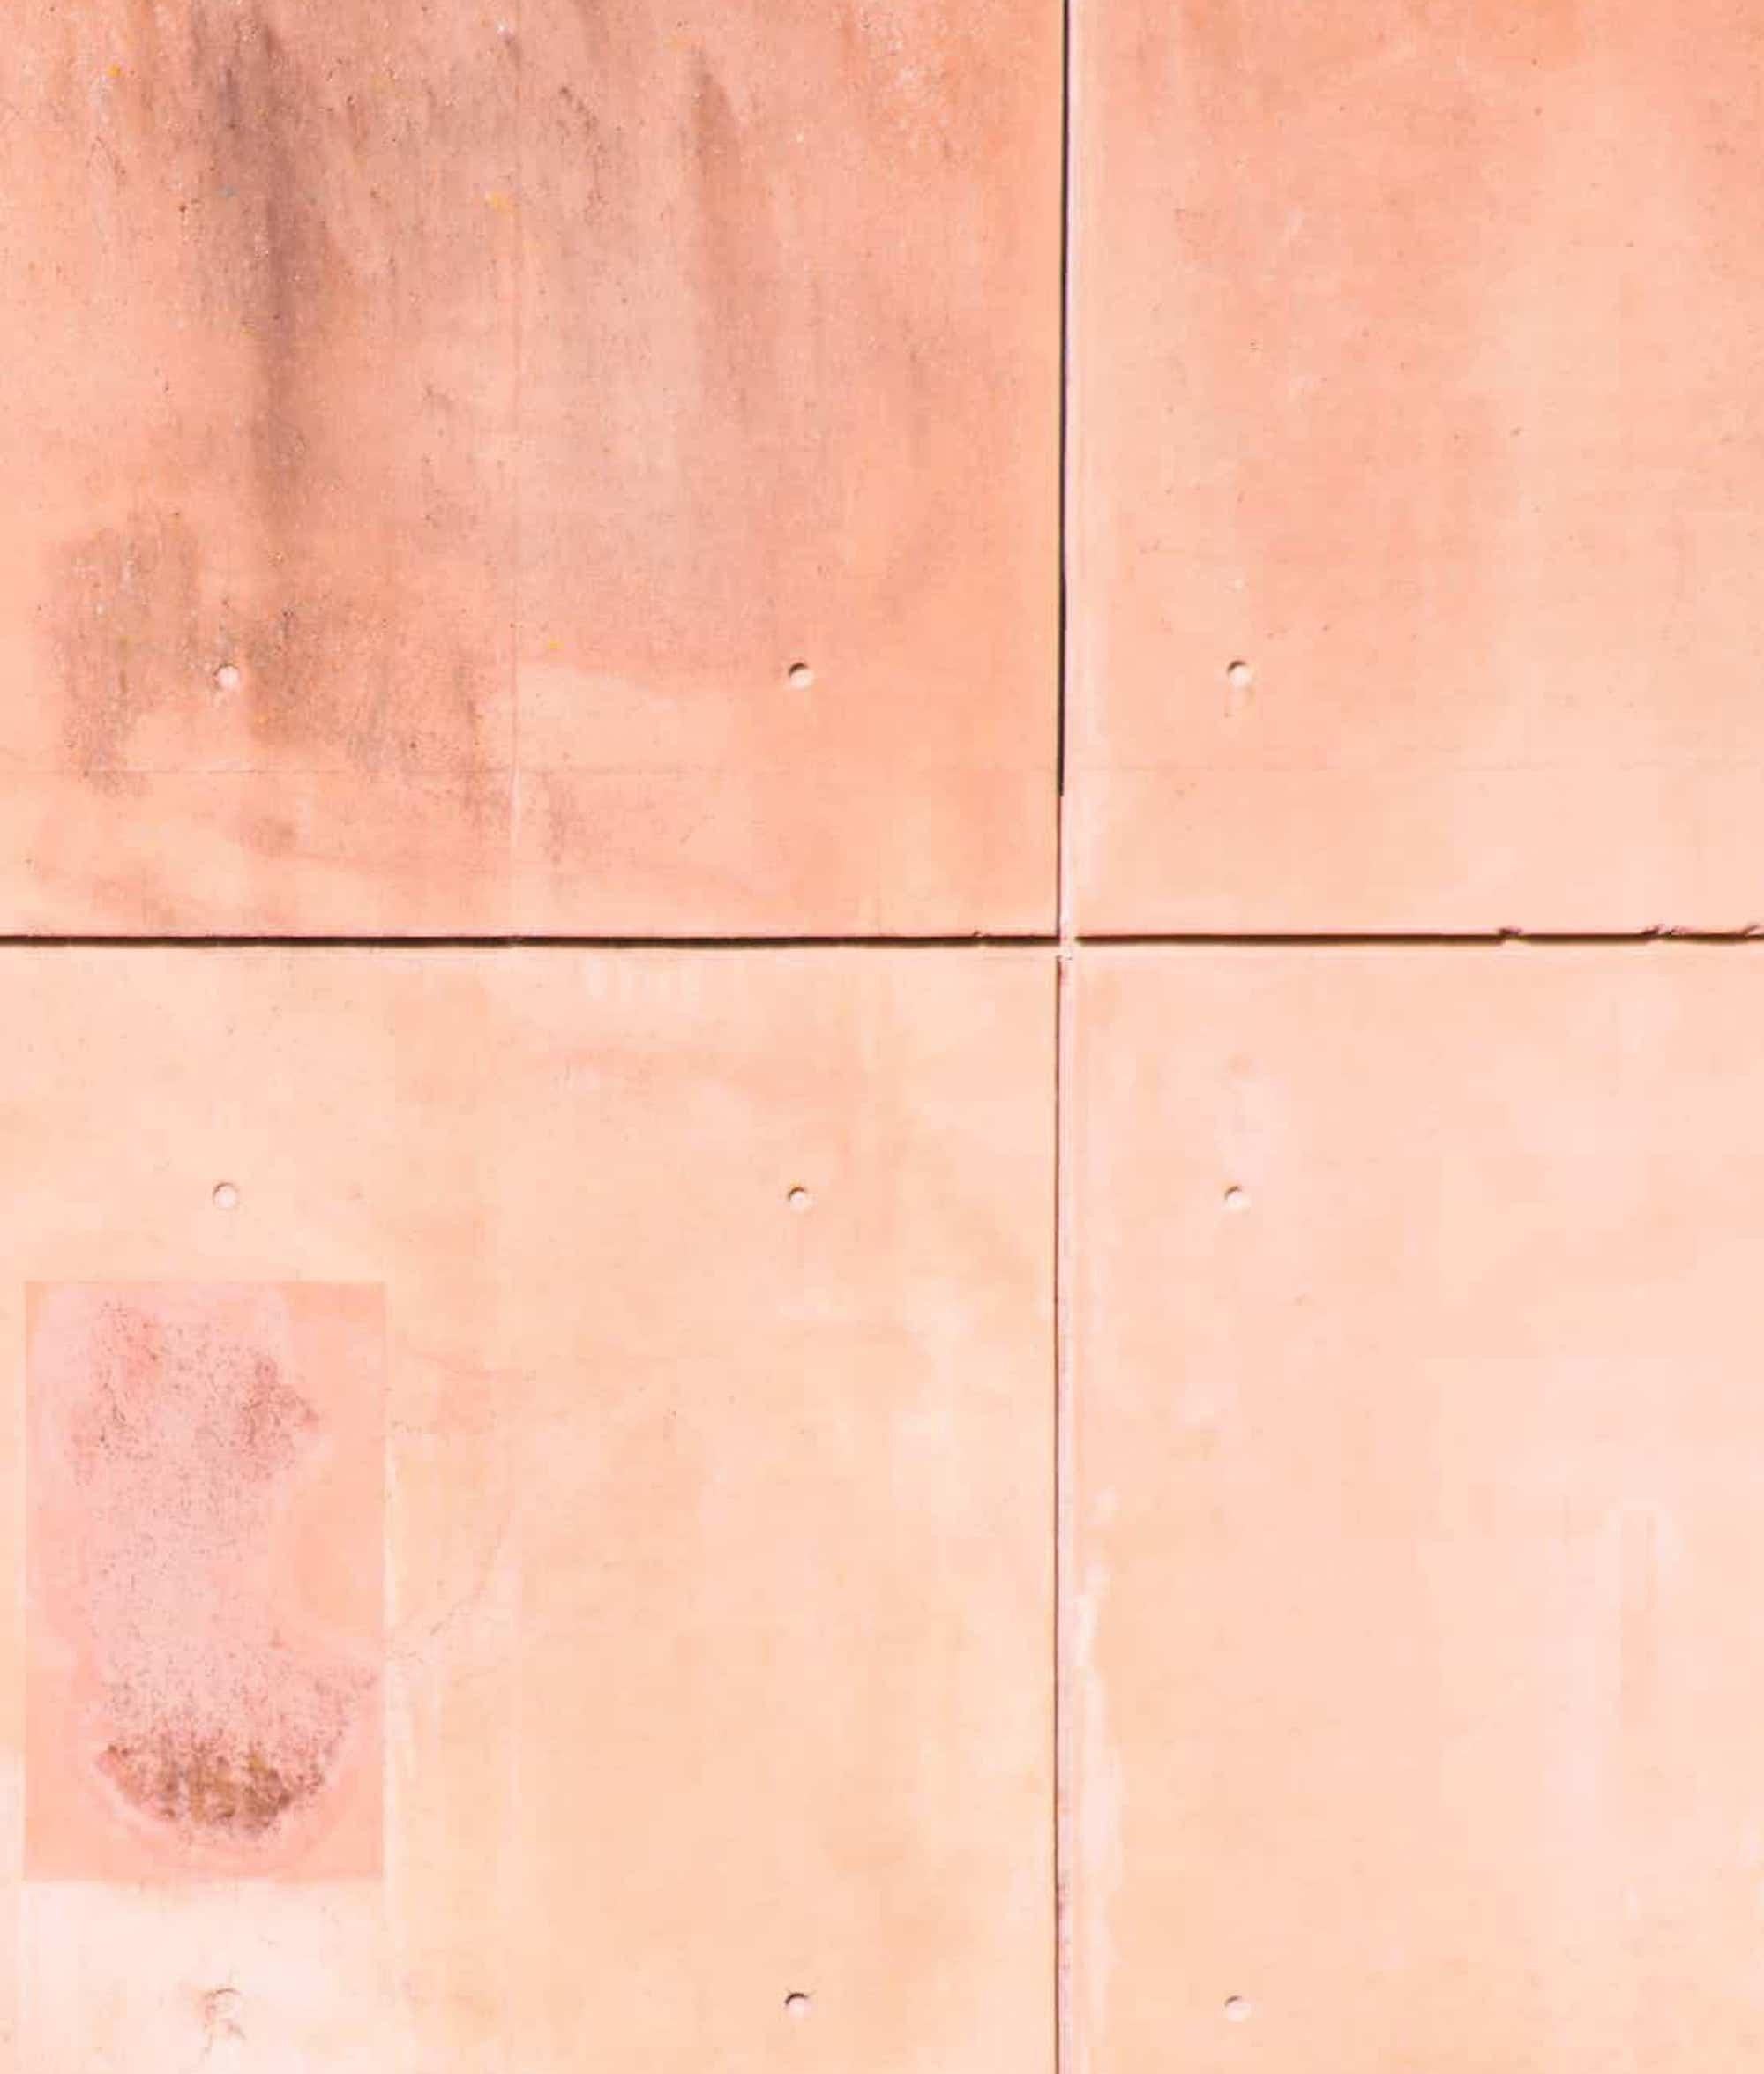 Untitled XII by Matthieu Venot - Abstract photography, architecture, pink wall For Sale 2